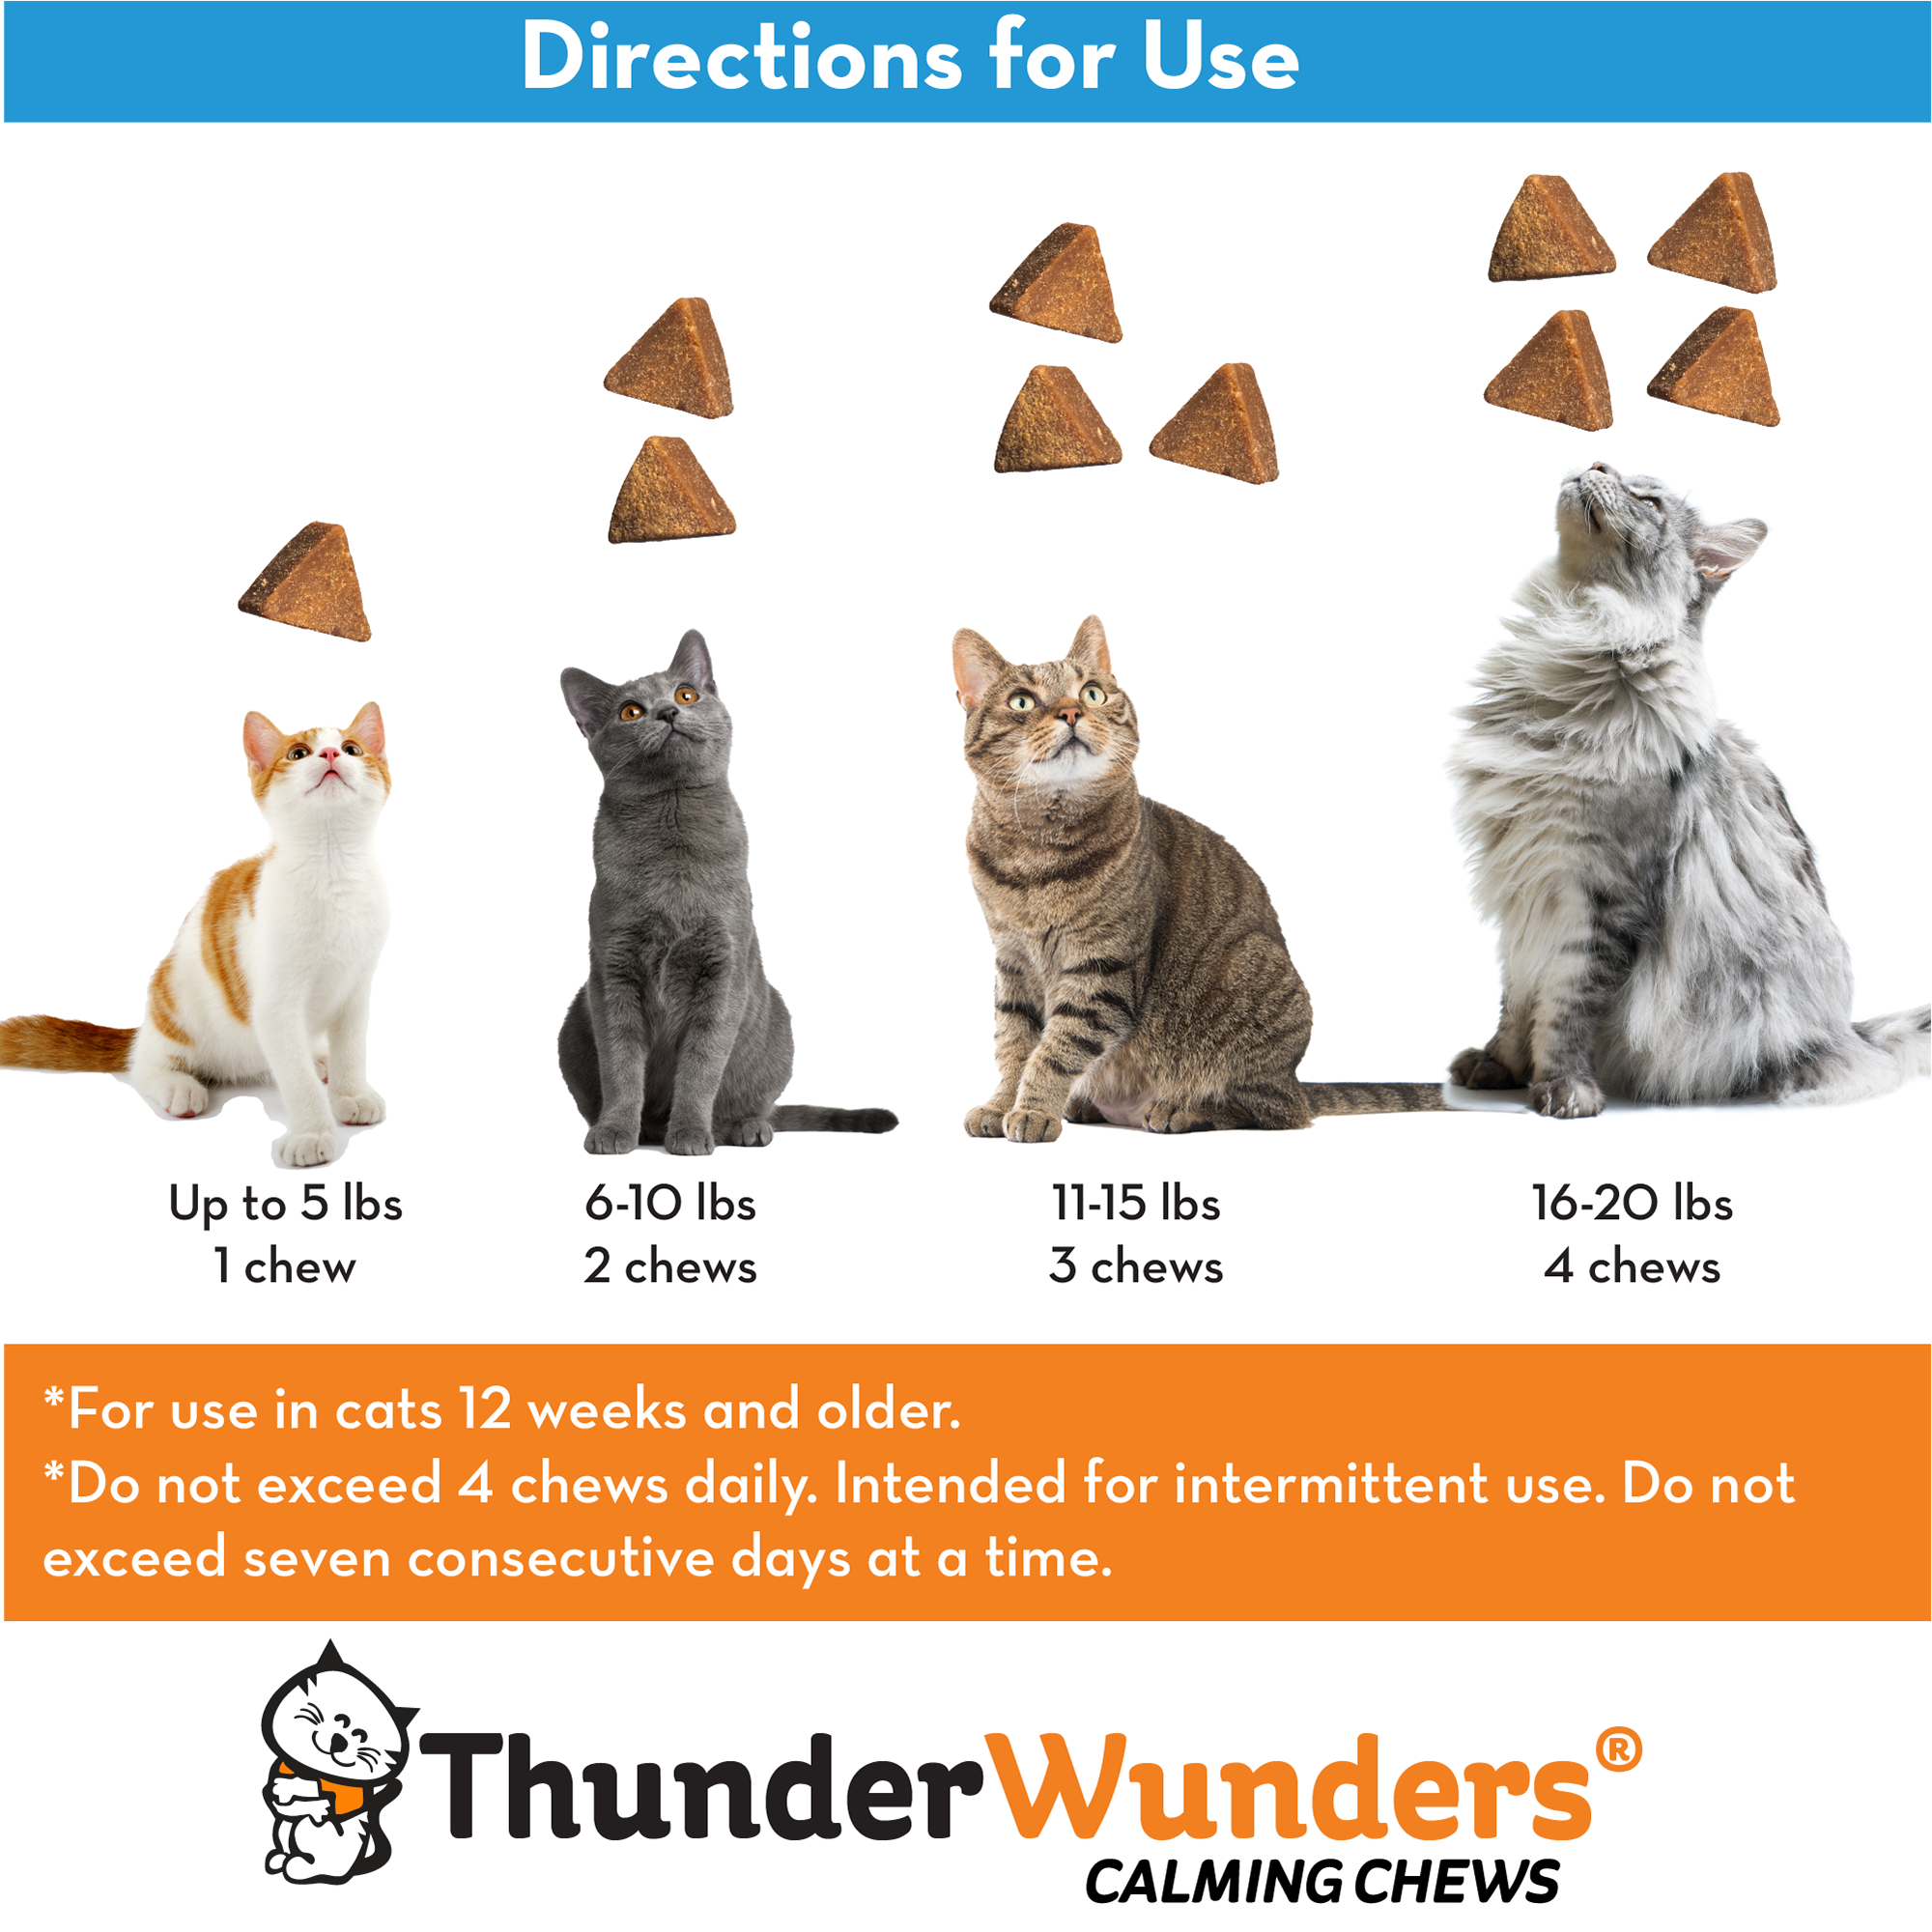 ThunderWunders Cat Calming Chews Directions for Use